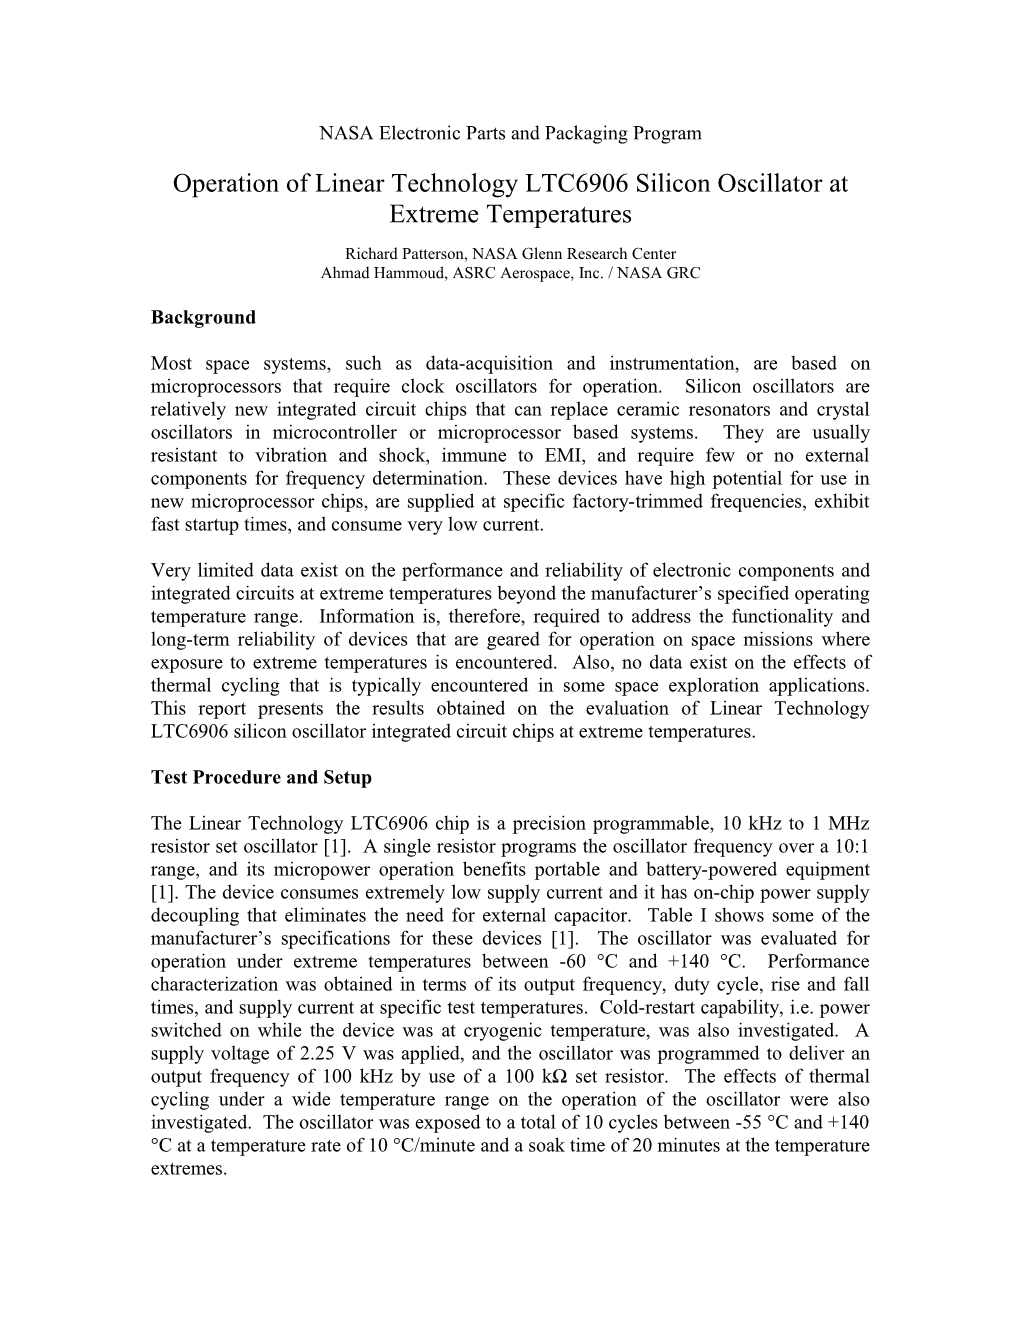 Operation of Linear Technology LTC6906 Silicon Oscillator at Extreme Temperatures